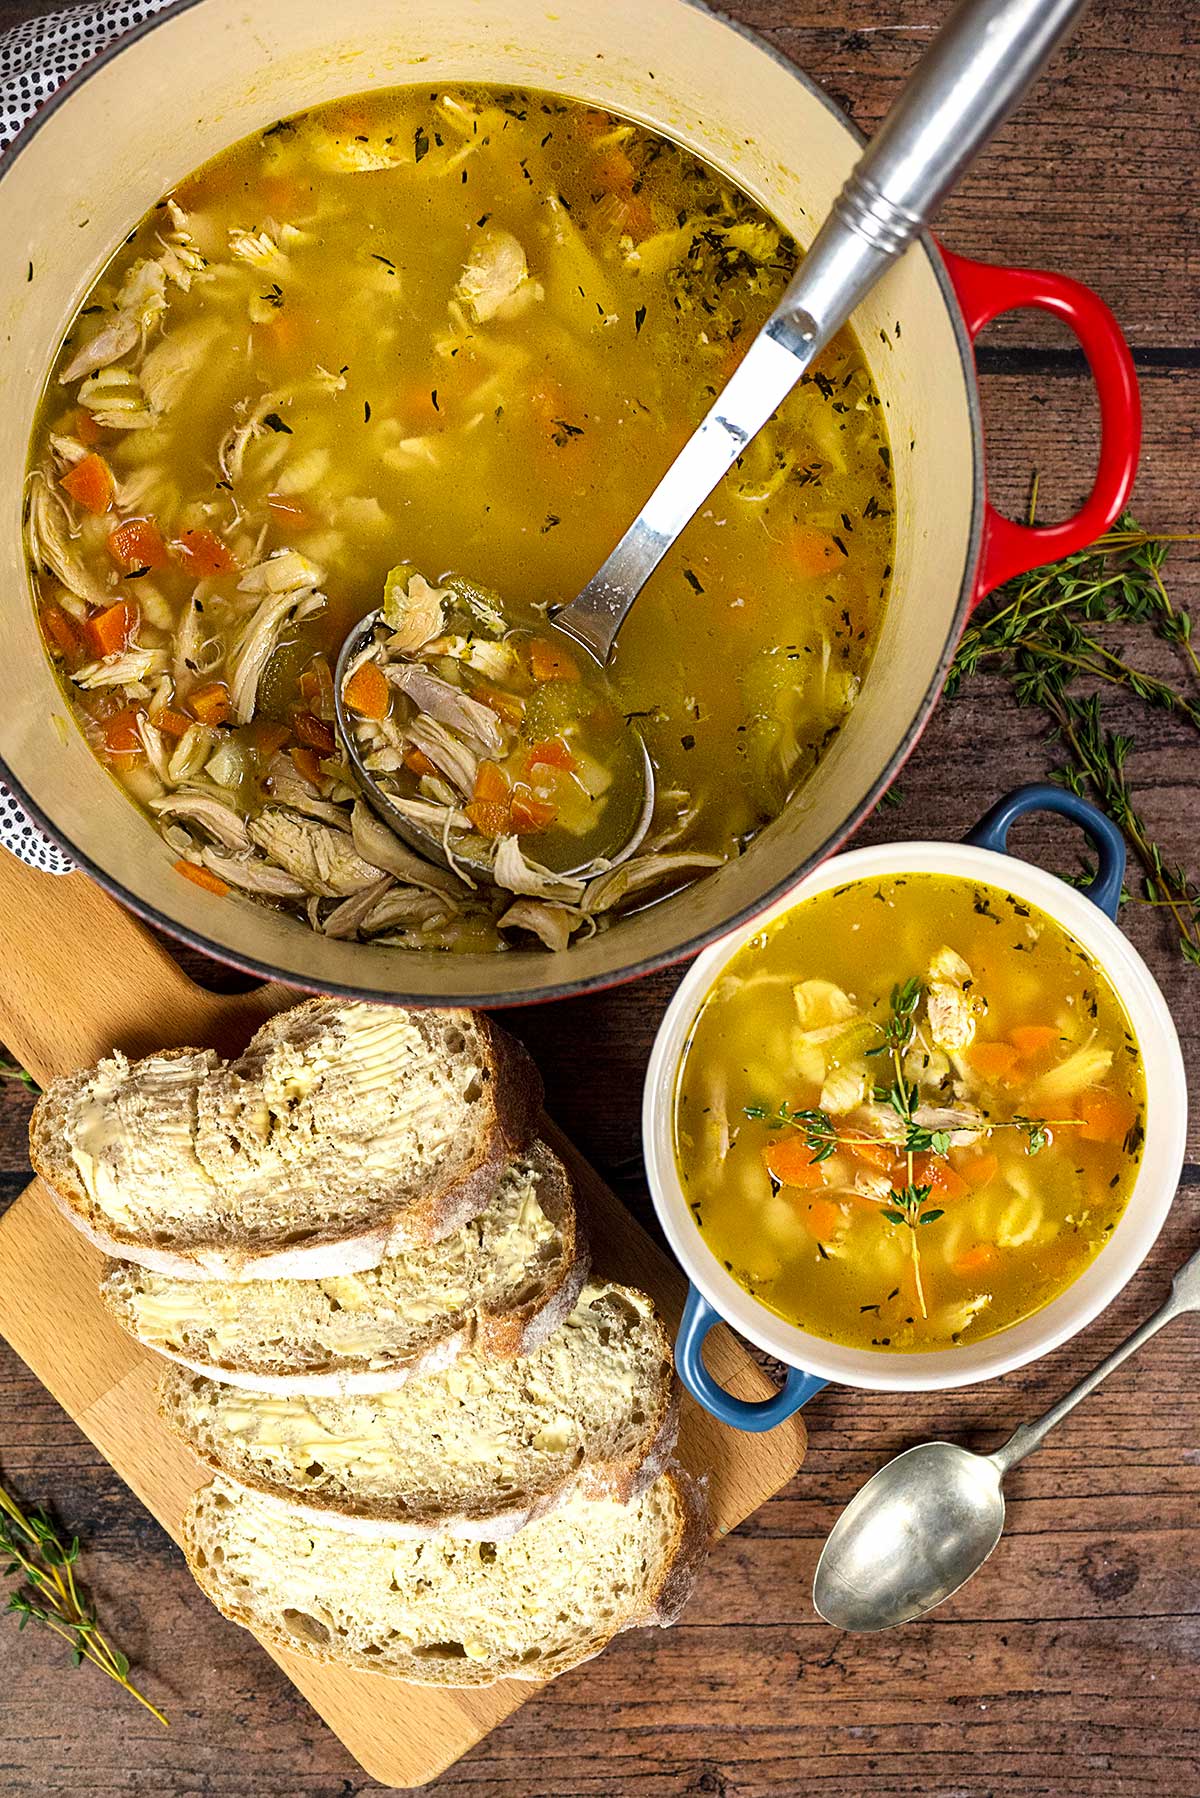 A large pan of turkey soup next to a bowl of soup and some slices of buttered bread.